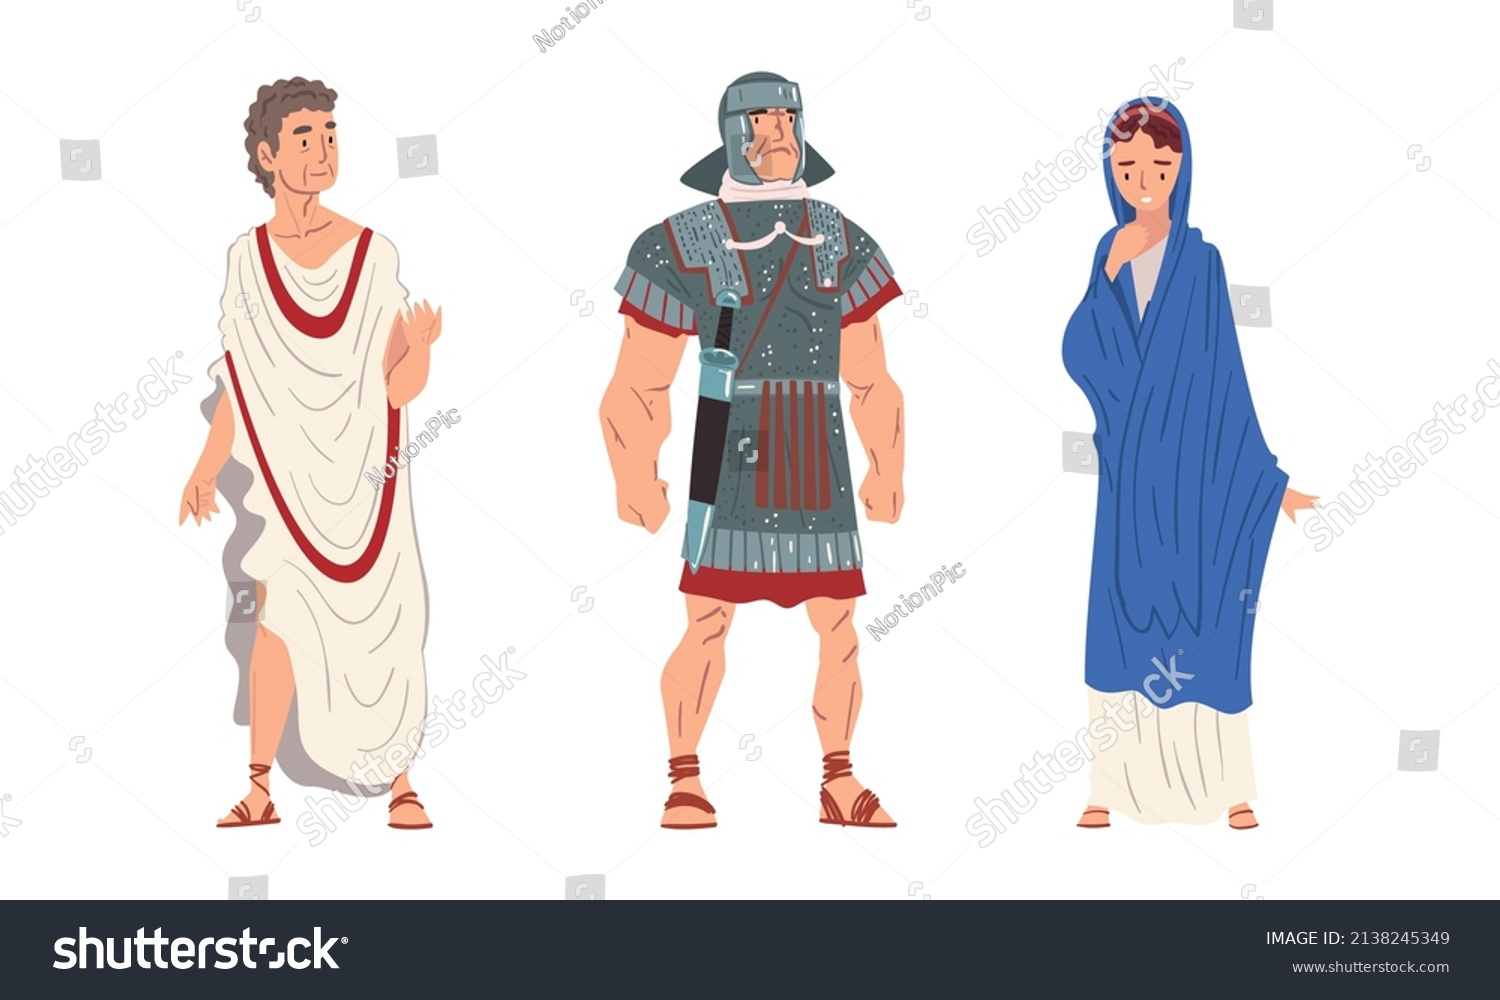 66 Woman gladiator fights male gladiators Images, Stock Photos ...